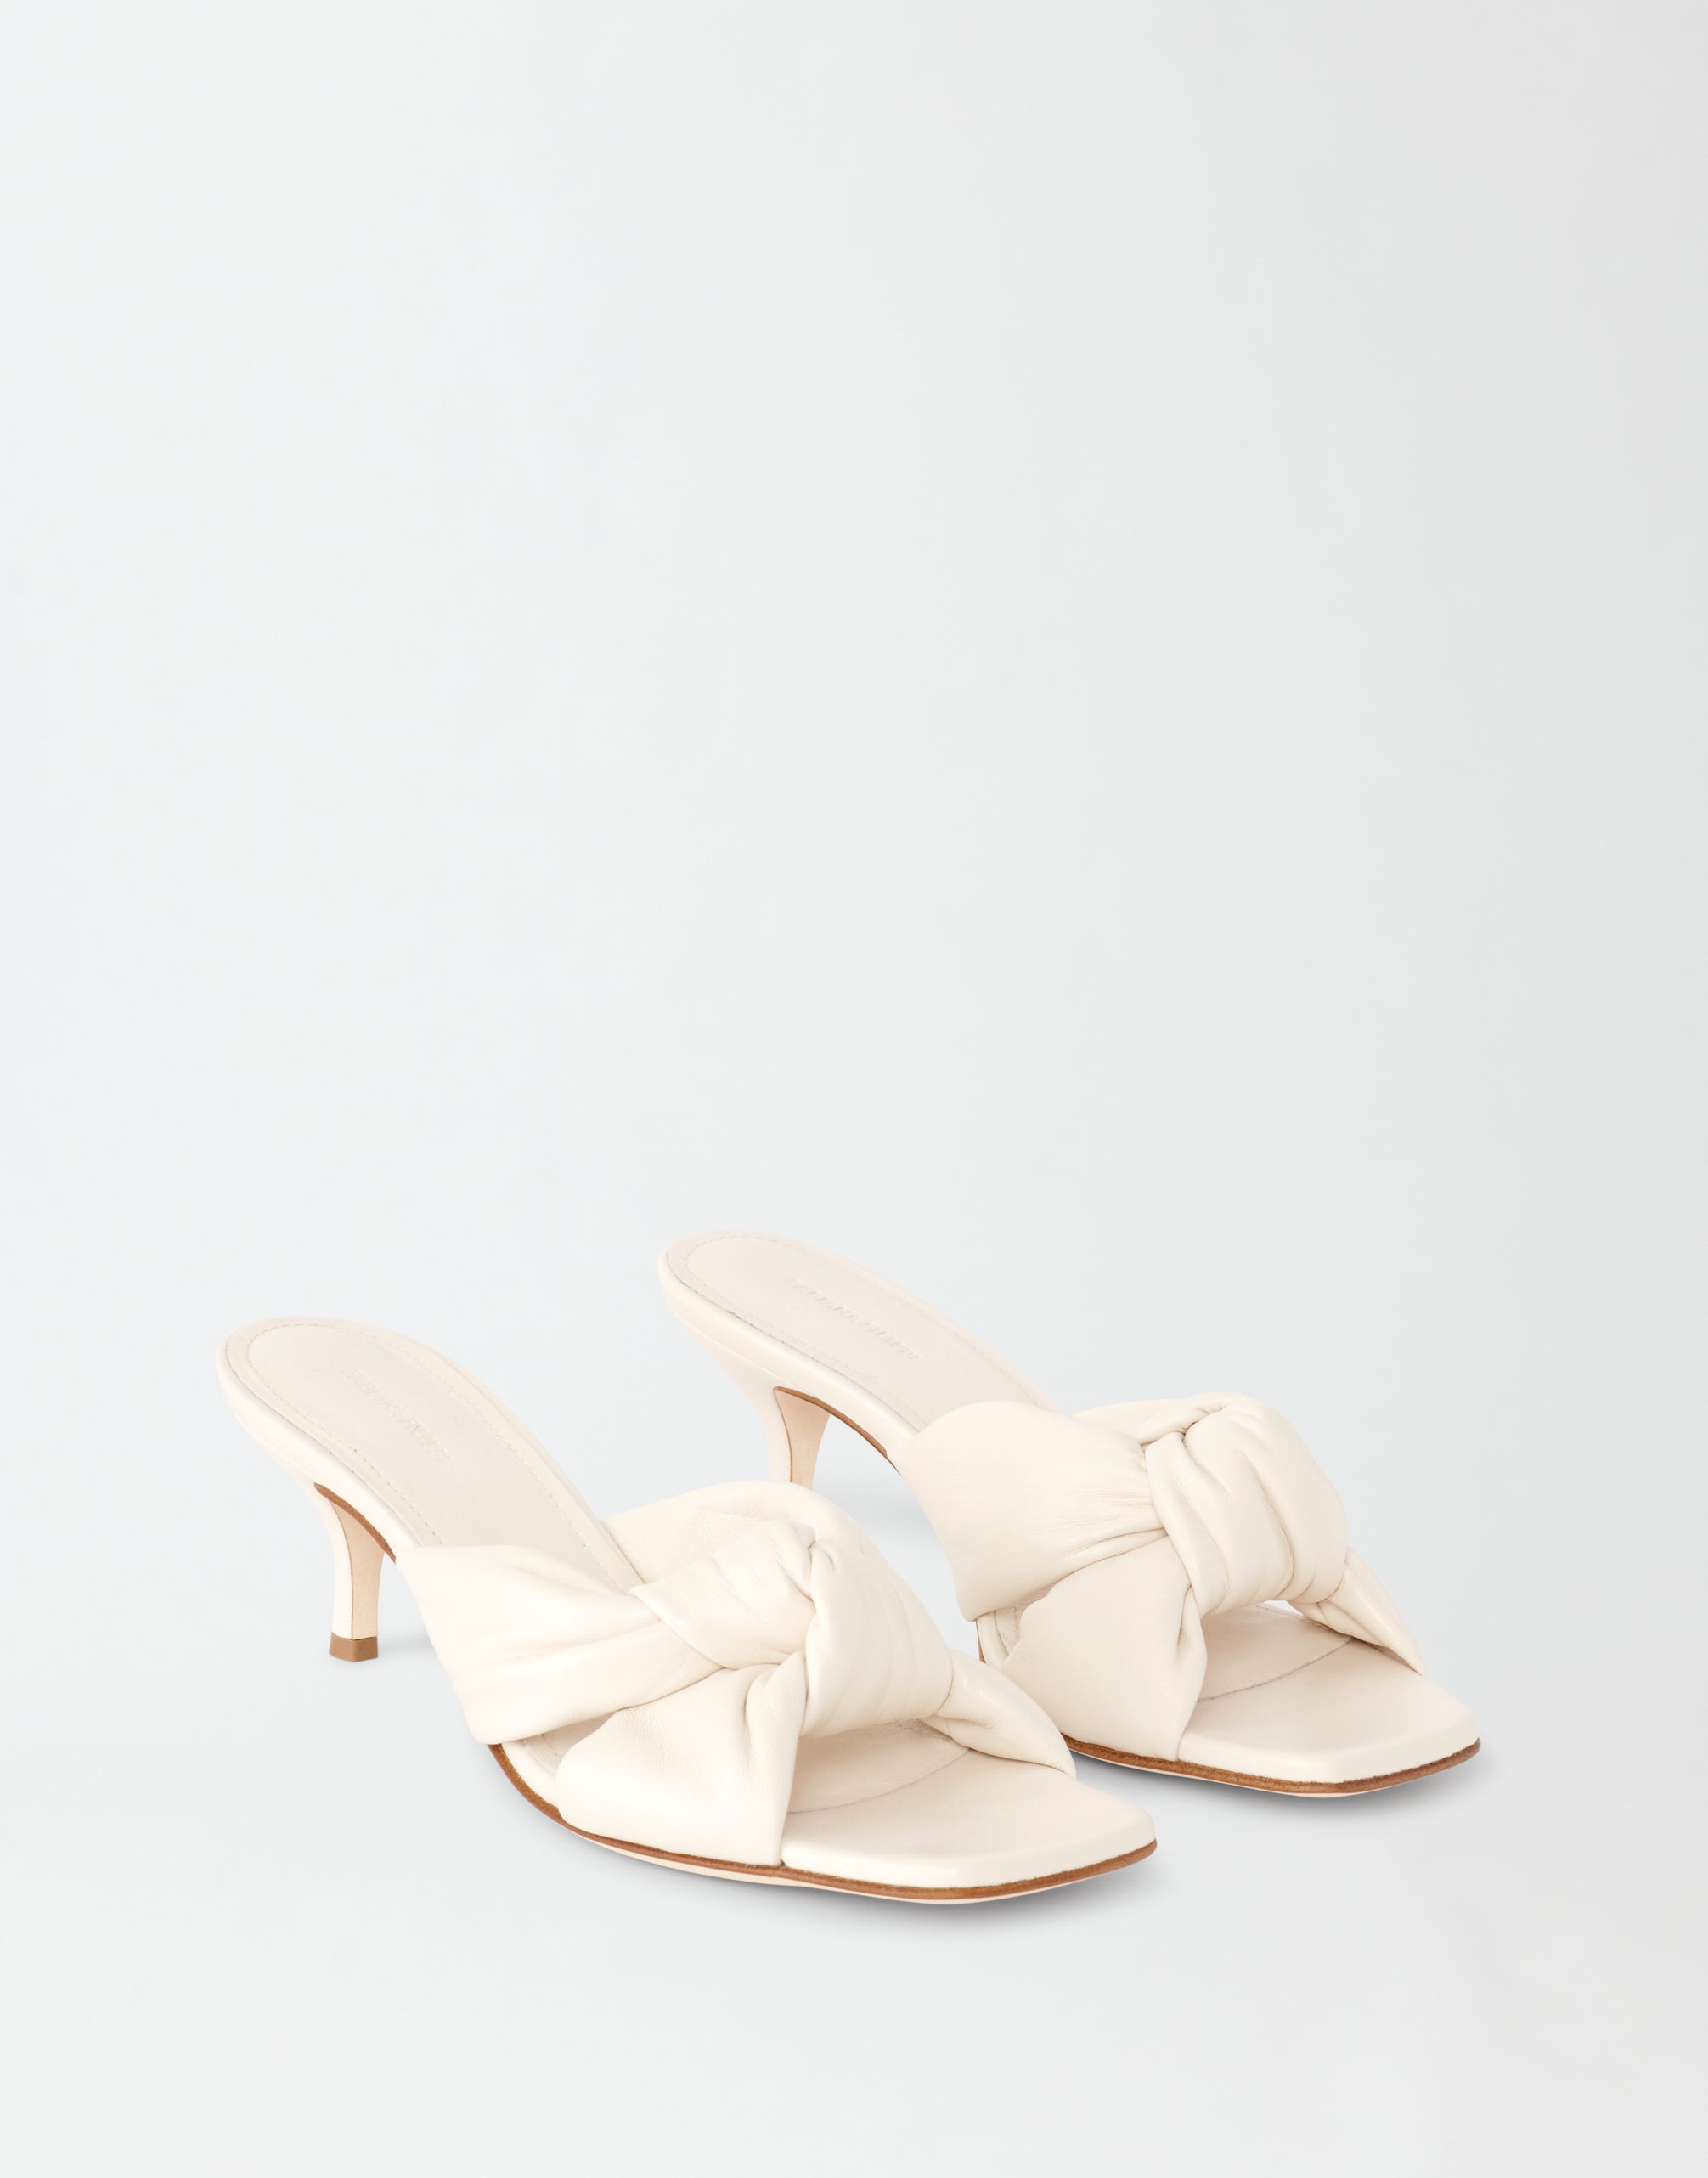 Nappa leather mules, butter